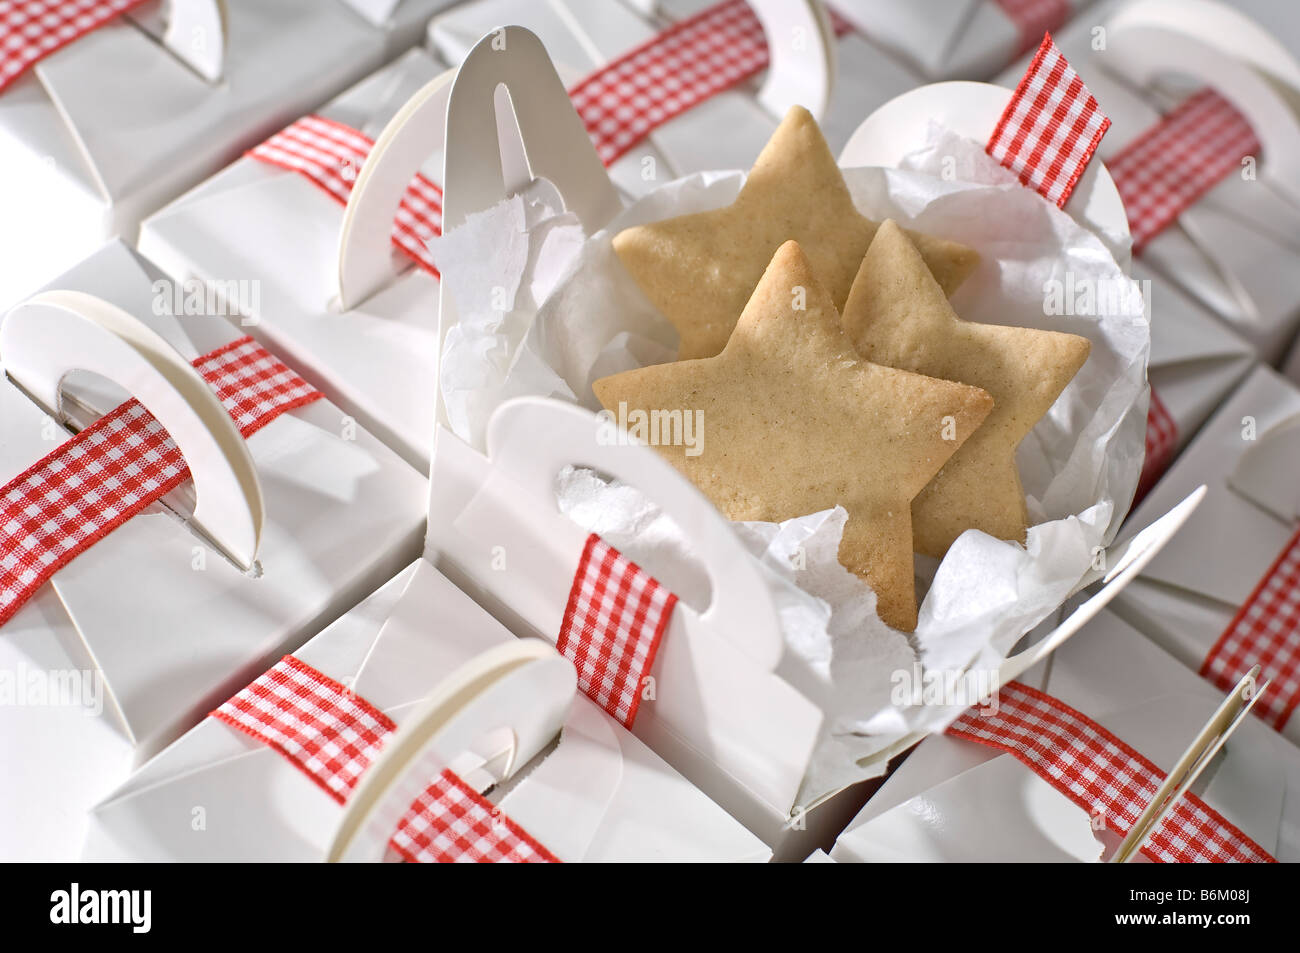 Star shaped cut out biscuits being packed in simple plain white boxes for presents at Christmas. Tied up with red gingham ribbon Stock Photo